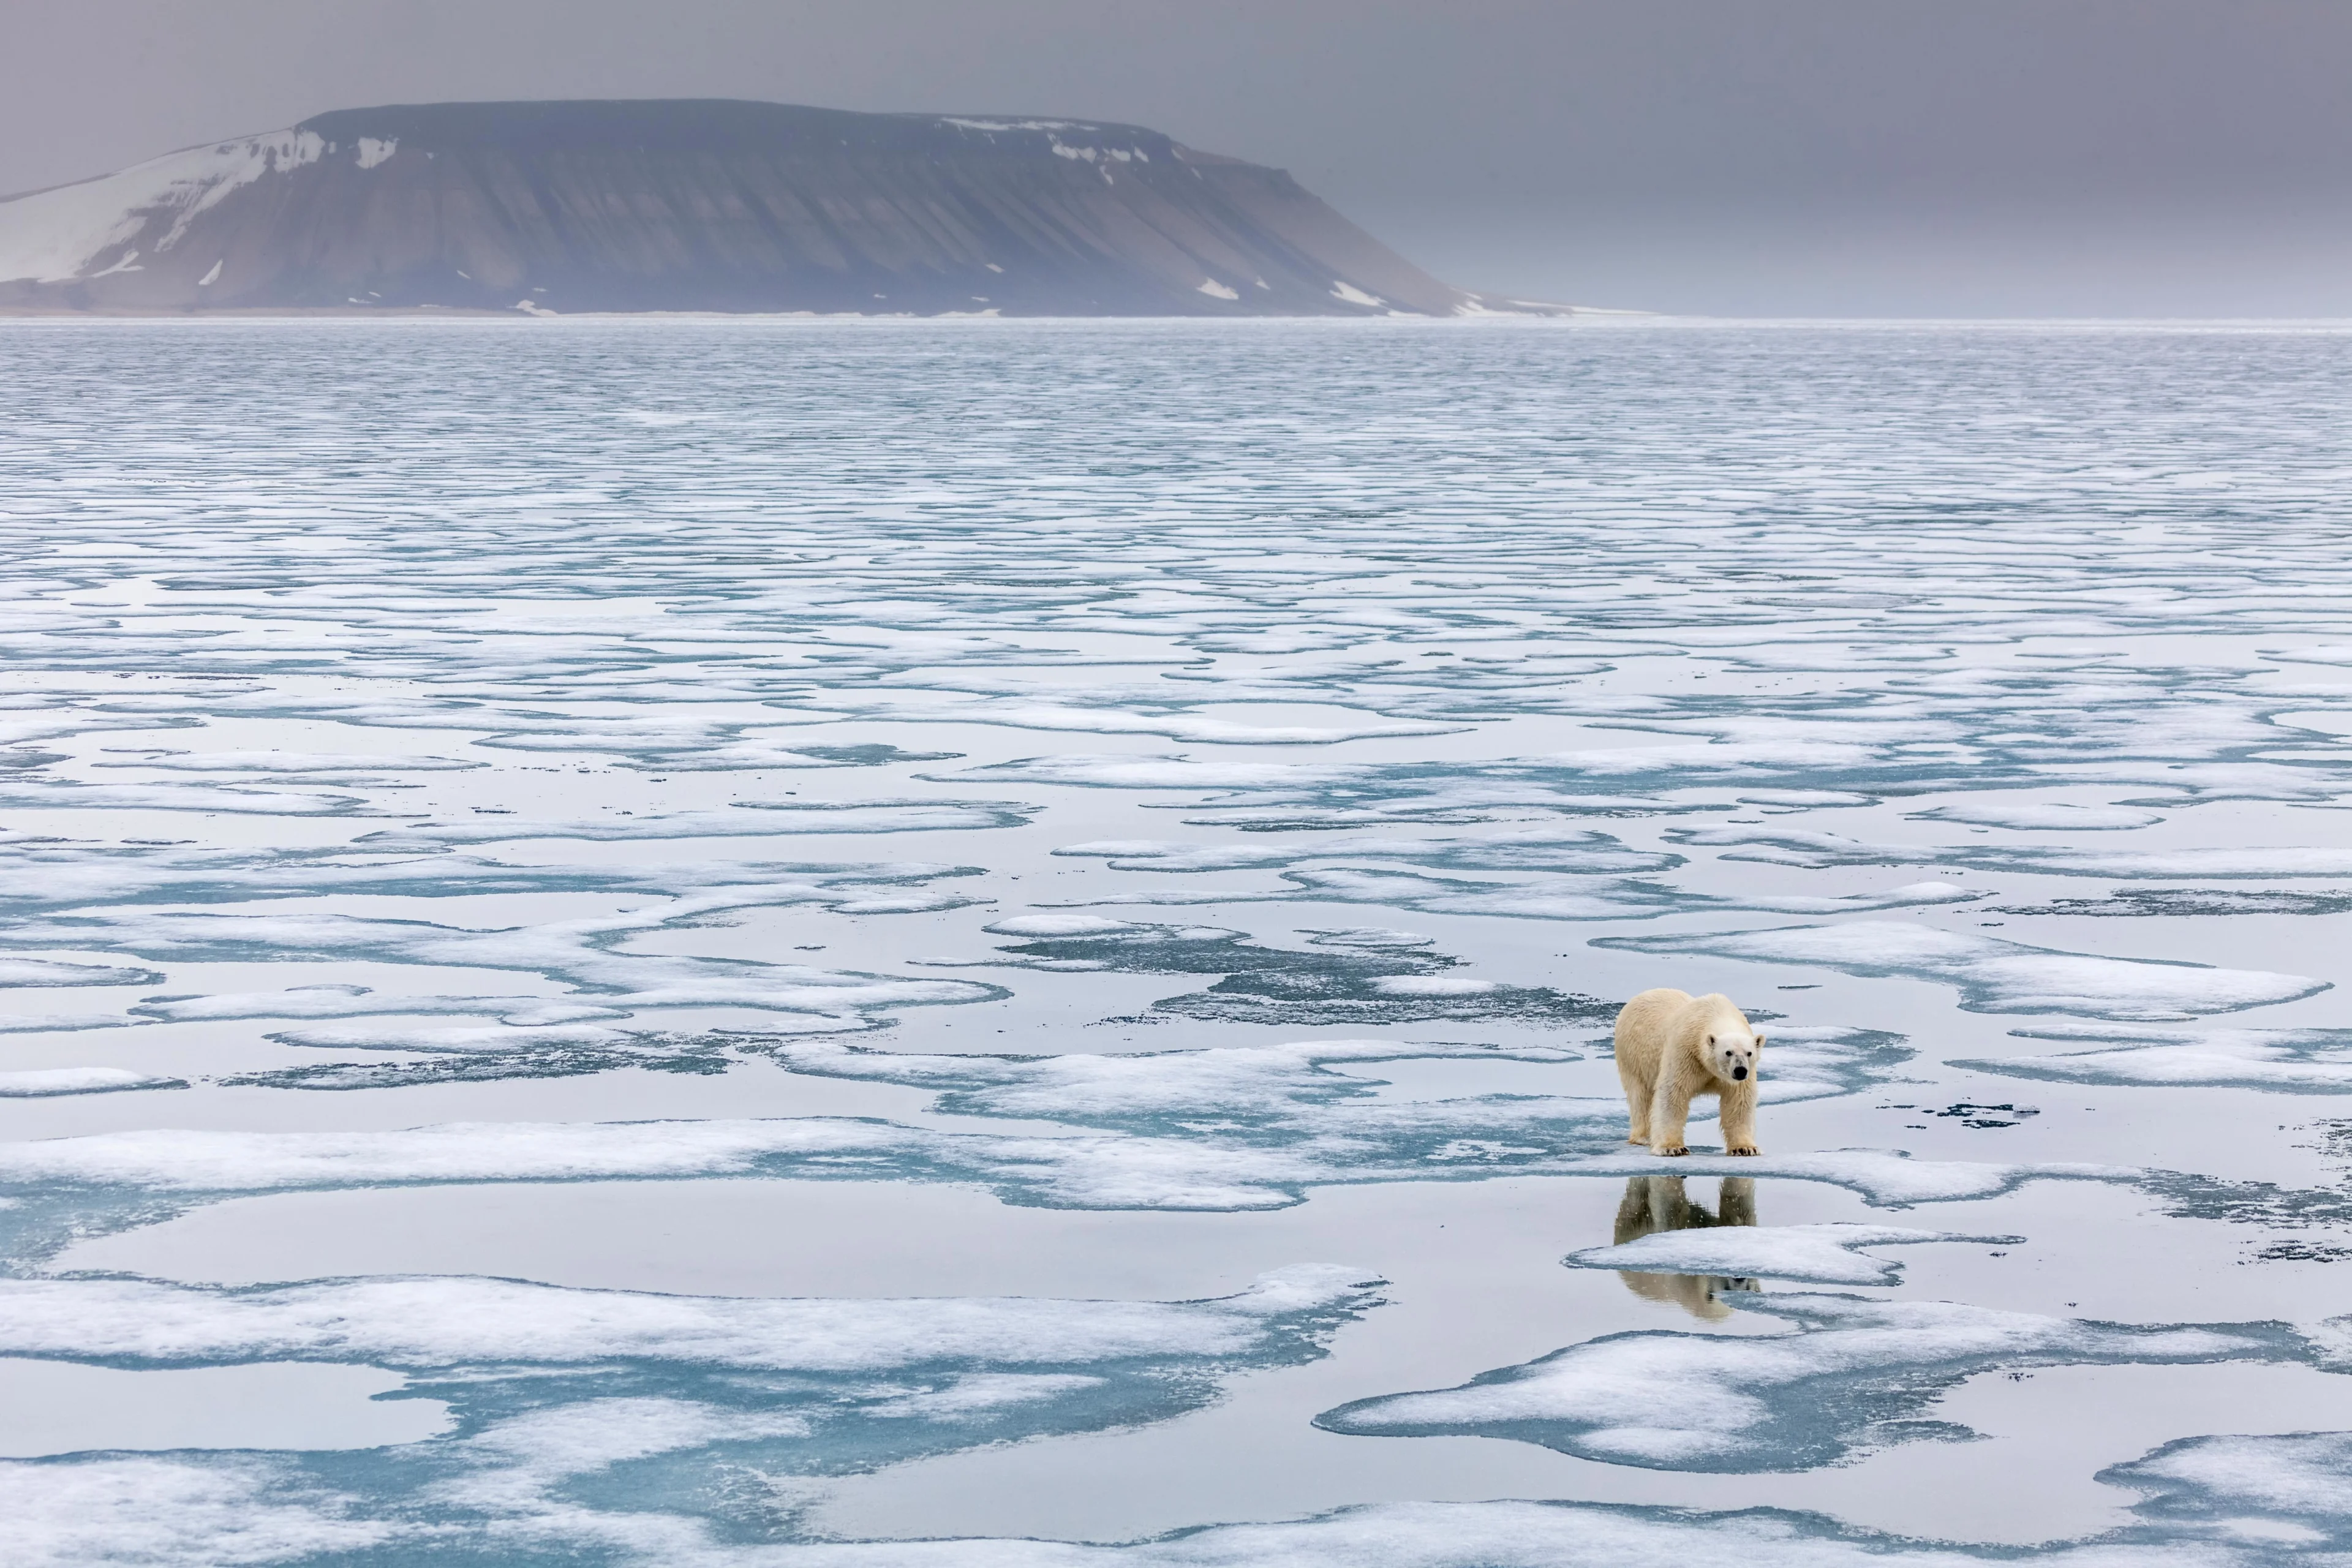 Getty Images: Polar bear in Norway's Svalbard archipelago. Credit: Patrick J. Endres/Getty Images